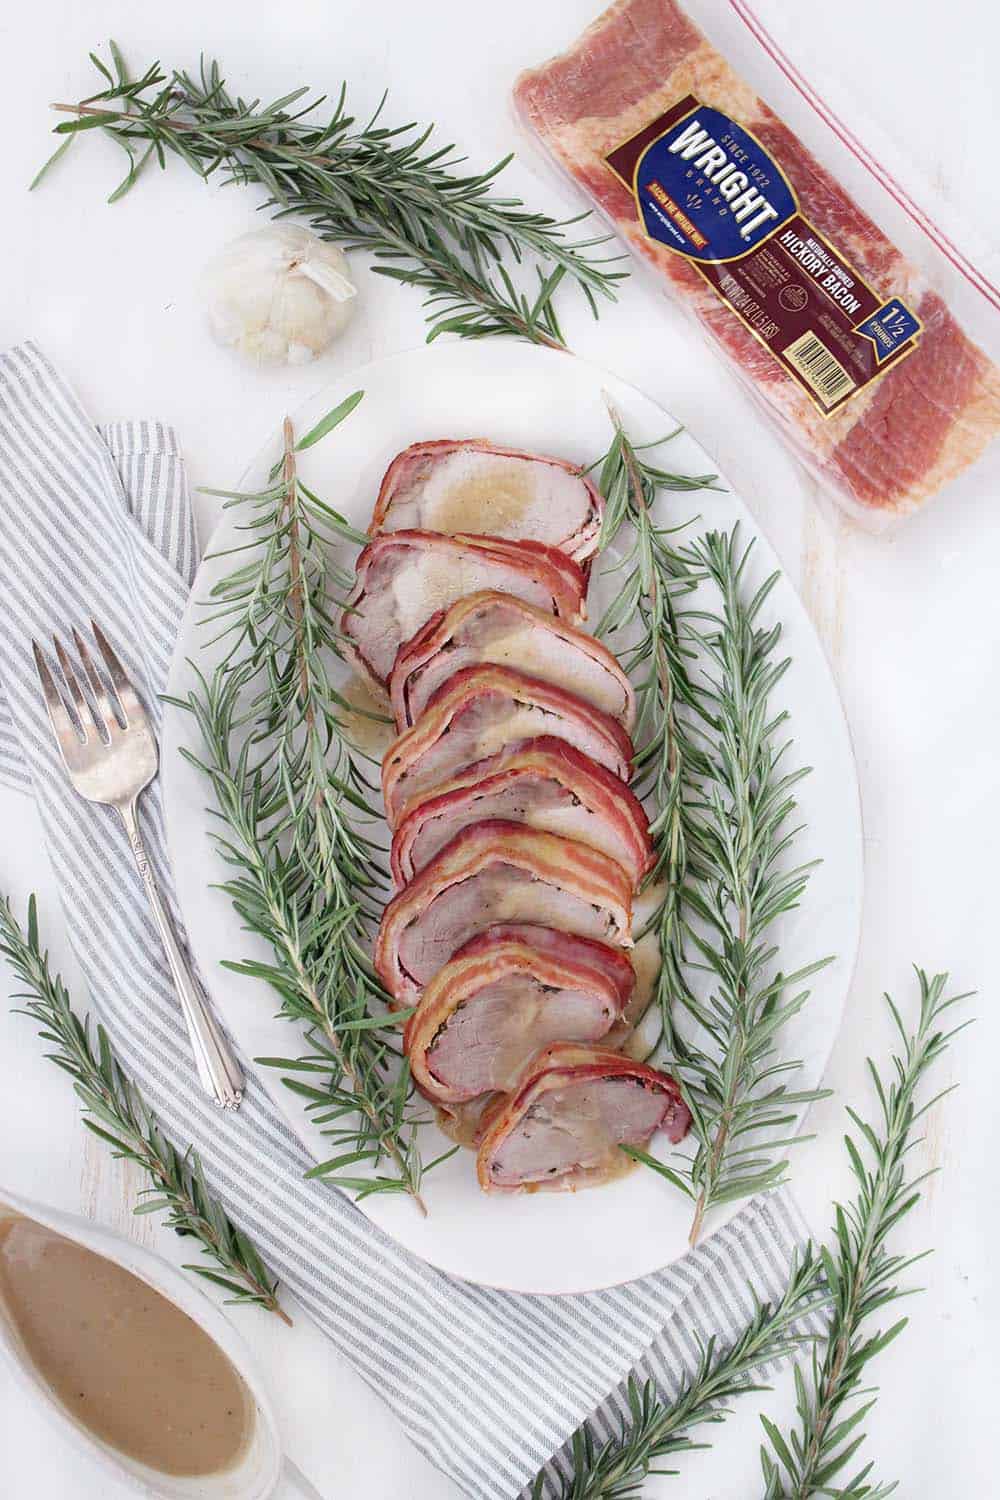 This Bacon Wrapped Pork Loin is a beautiful, impressive, and easy recipe to make ahead of time! Served with a sweet apple cider gravy, this meal is sure to impress at a dinner party or for Sunday dinner.